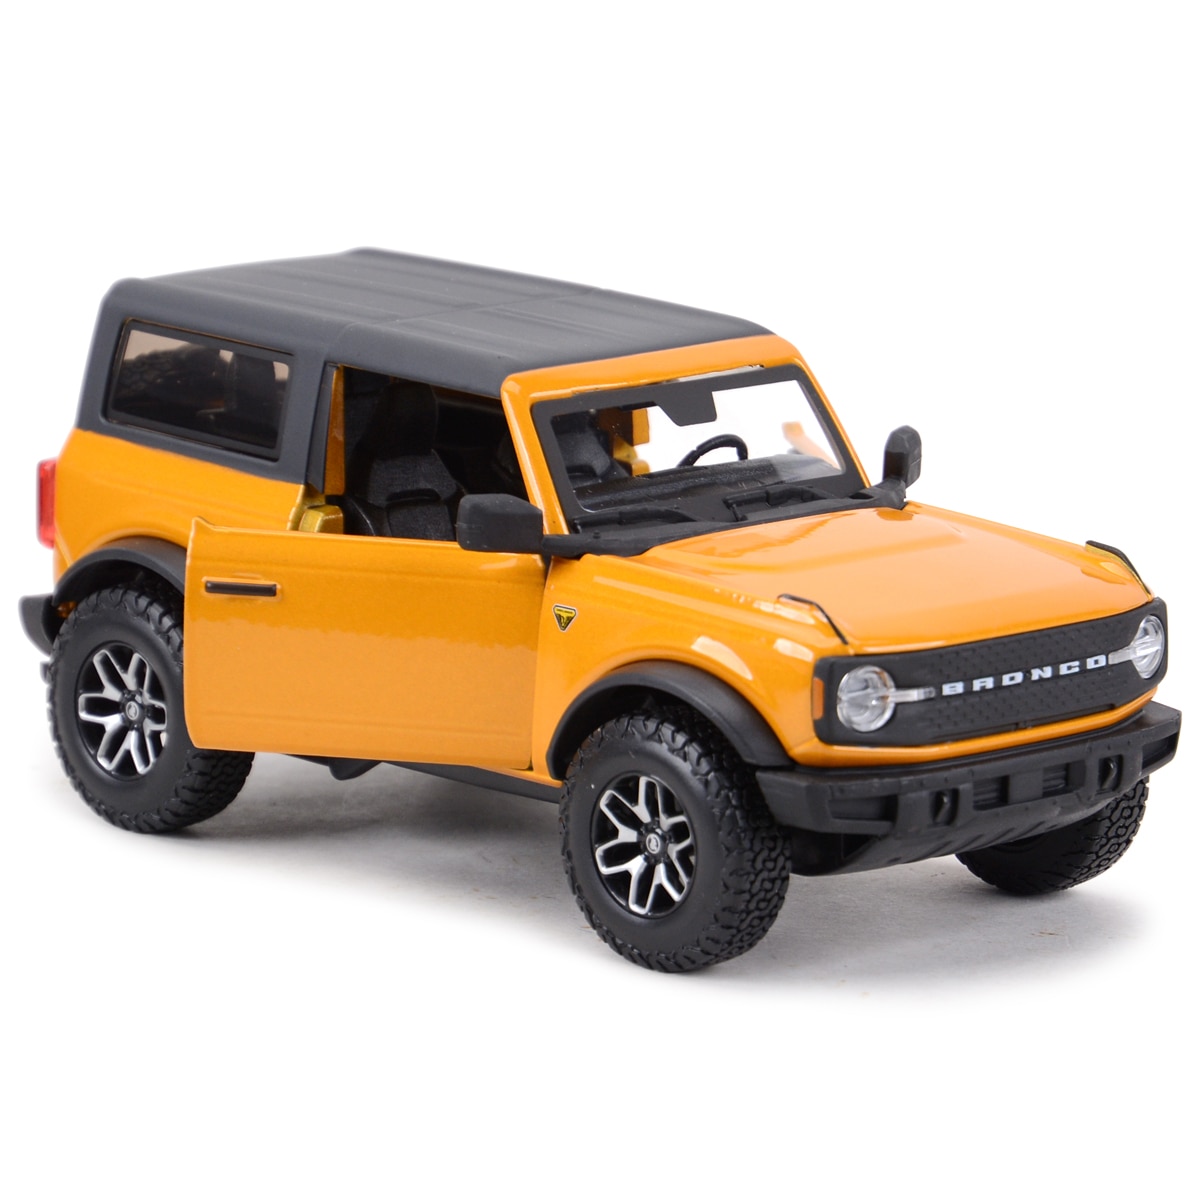 Машинка Maisto 31530, 1:24 SP (B) 2021 Ford Bronco (2 Doors Version) maisto 1 24 2008 hummer hx concept old version modified alloy car model collection gift toy boys toys